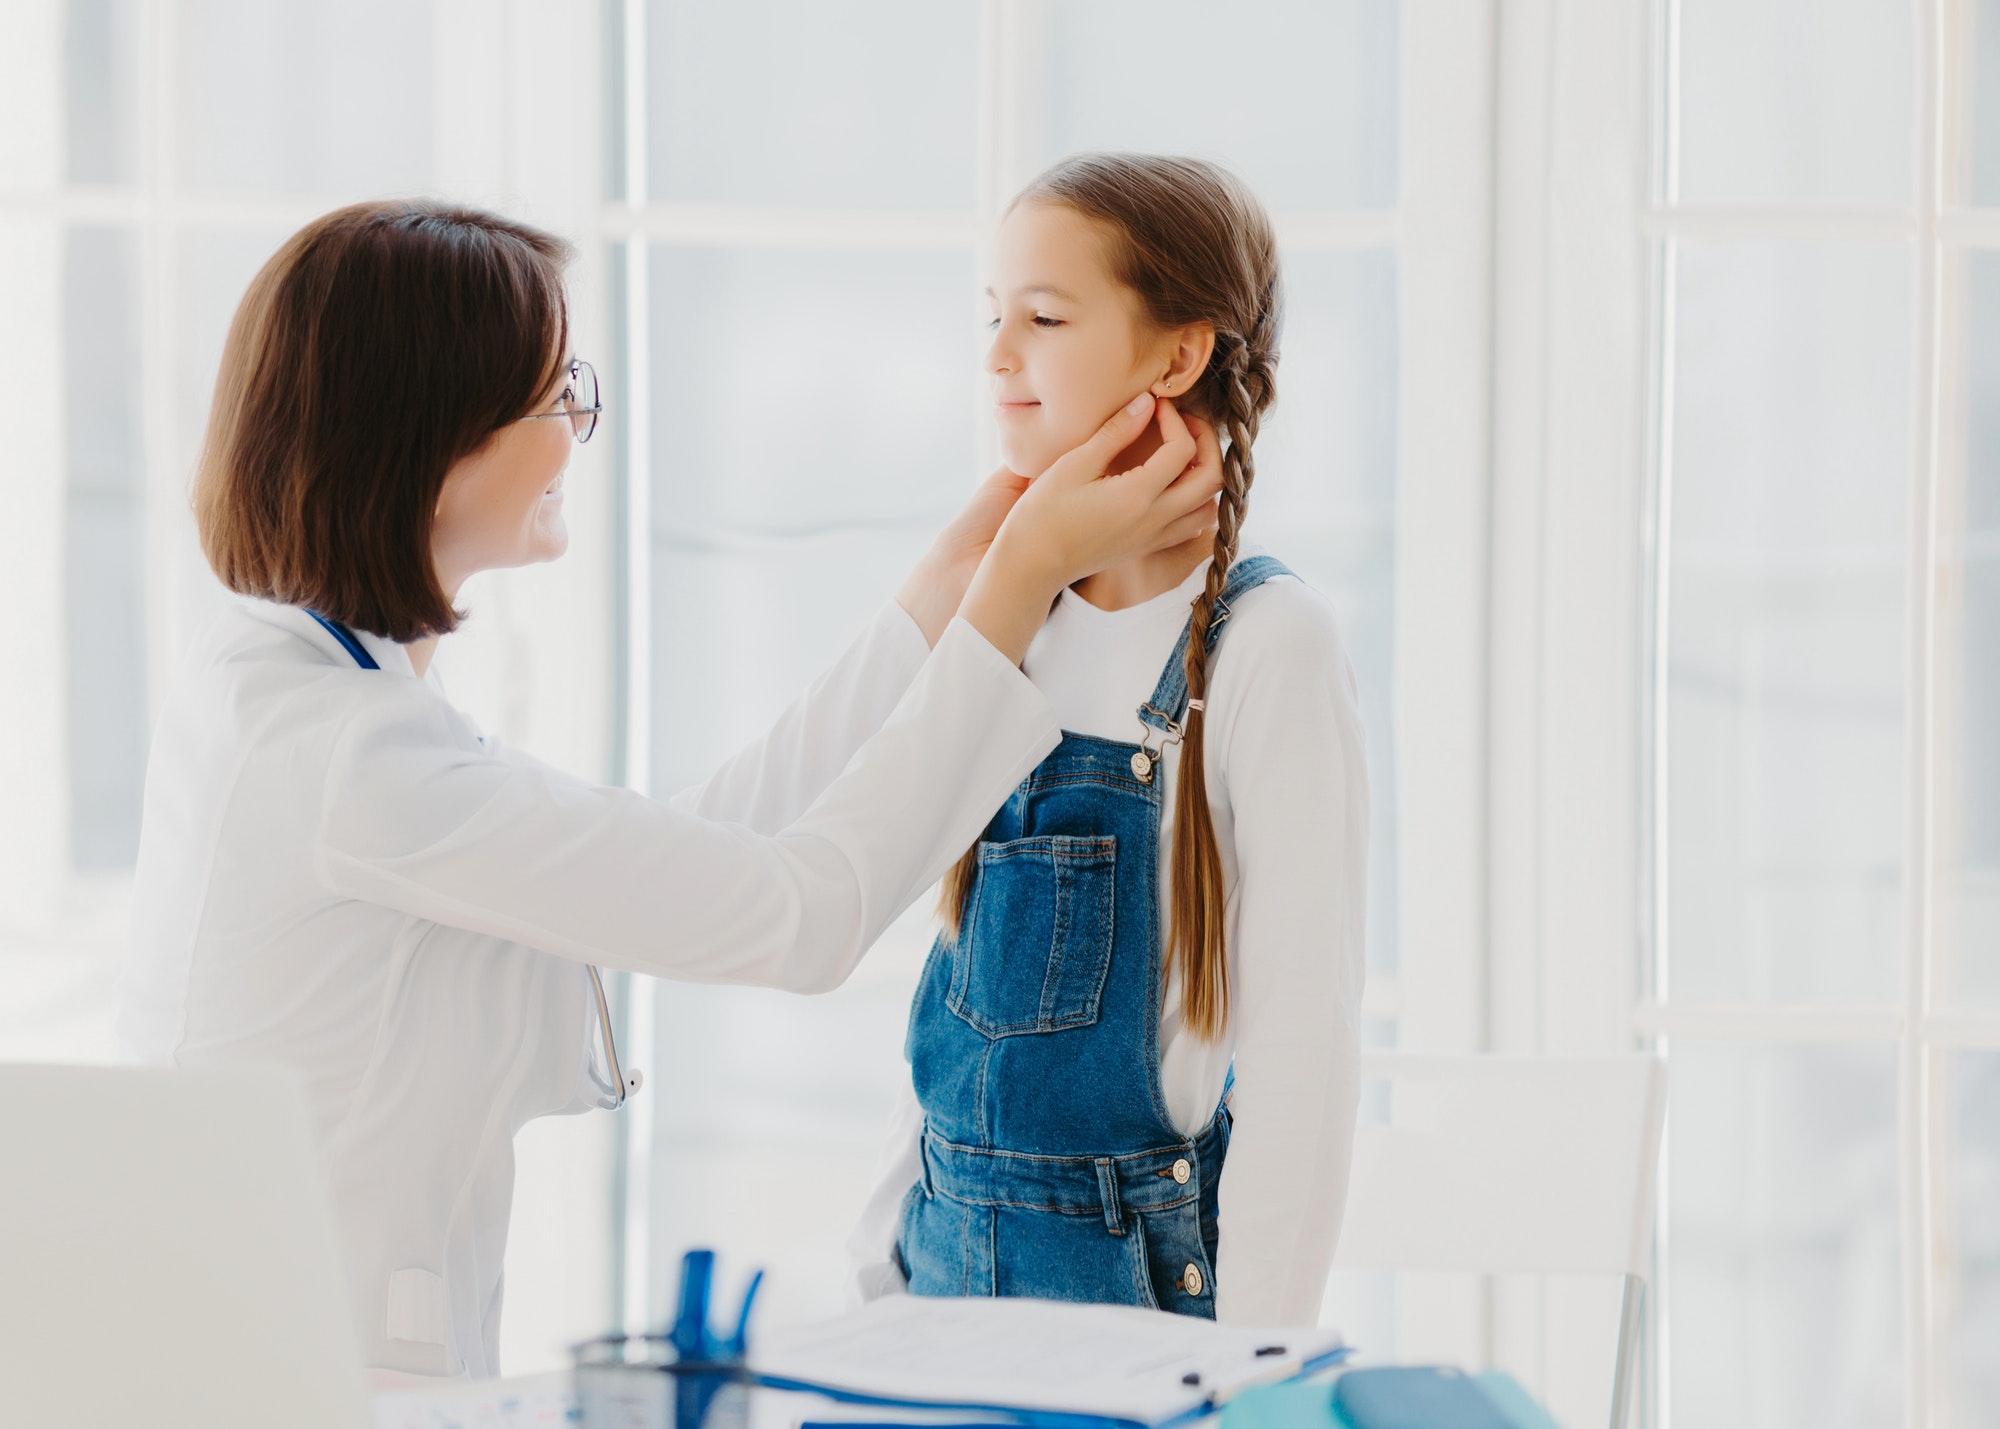 Female pediatrician examines childs throat, being professional skilled pediatrician, consults